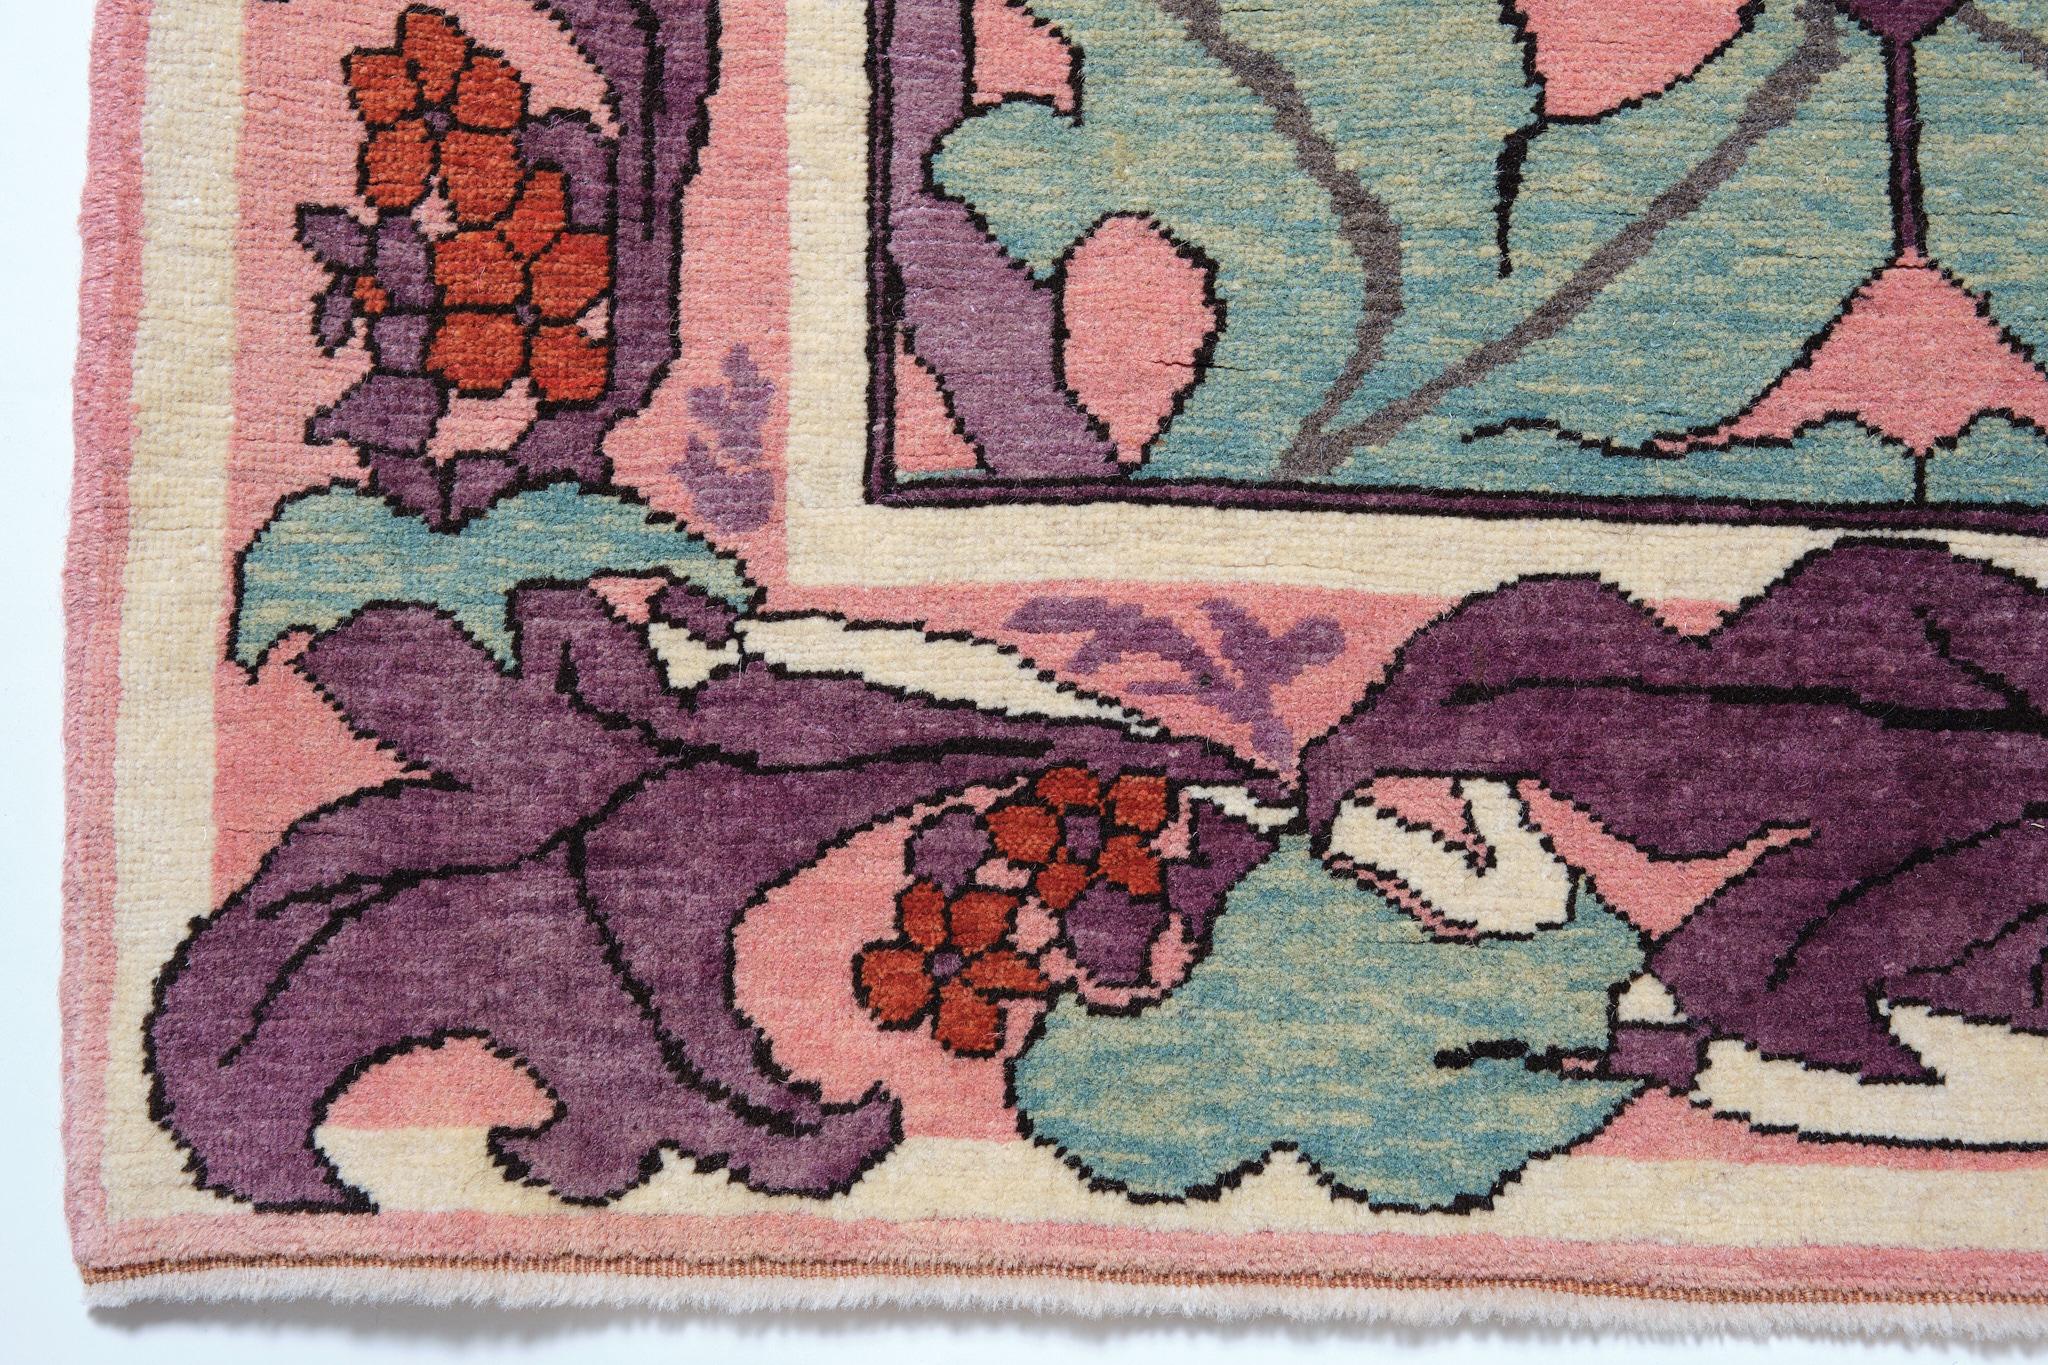 The source of the carpet comes from the book Arts & Crafts Carpets, by Malcolm Haslam, and David Black, 1991, fig.55. This Donegal carpet was possibly designed by the Silver Studio for Liberty’s c.1902, United Kingdom. In 1887 English artist and